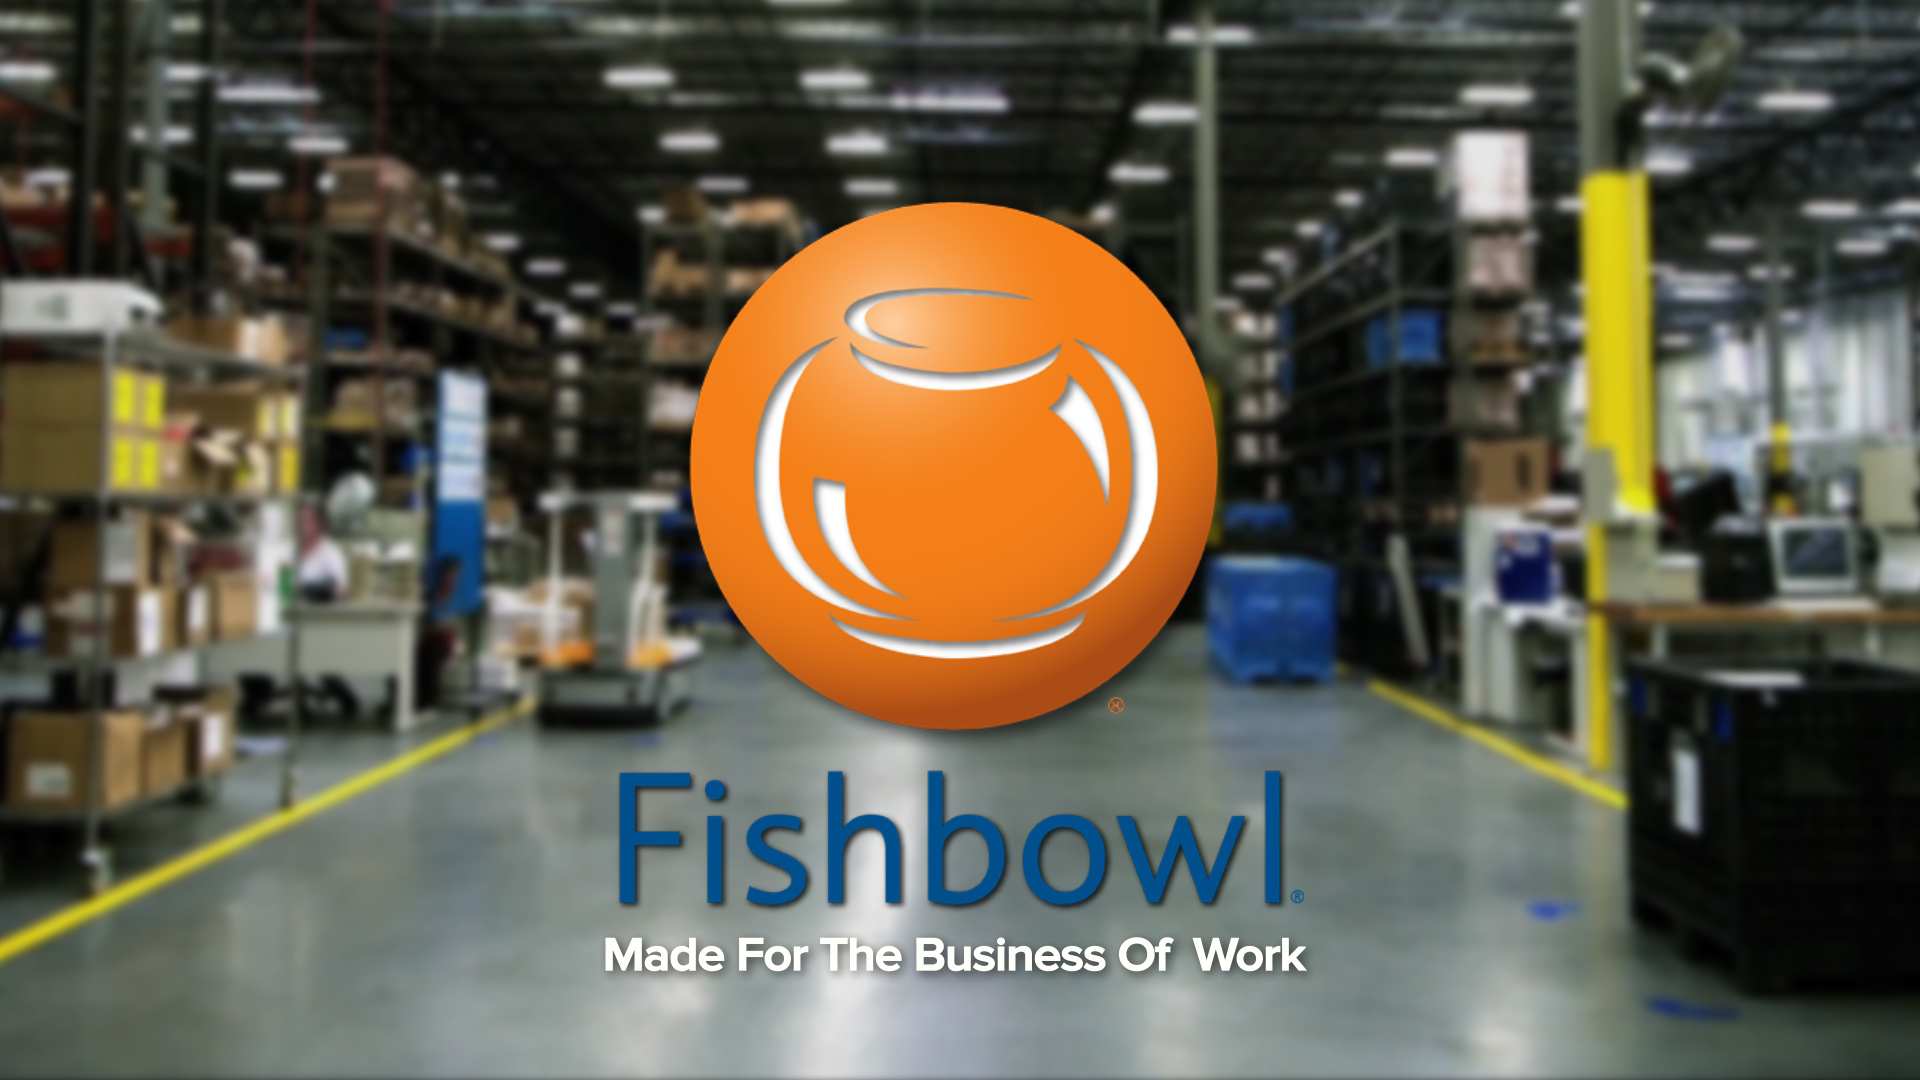 fishbowl inventory competitors